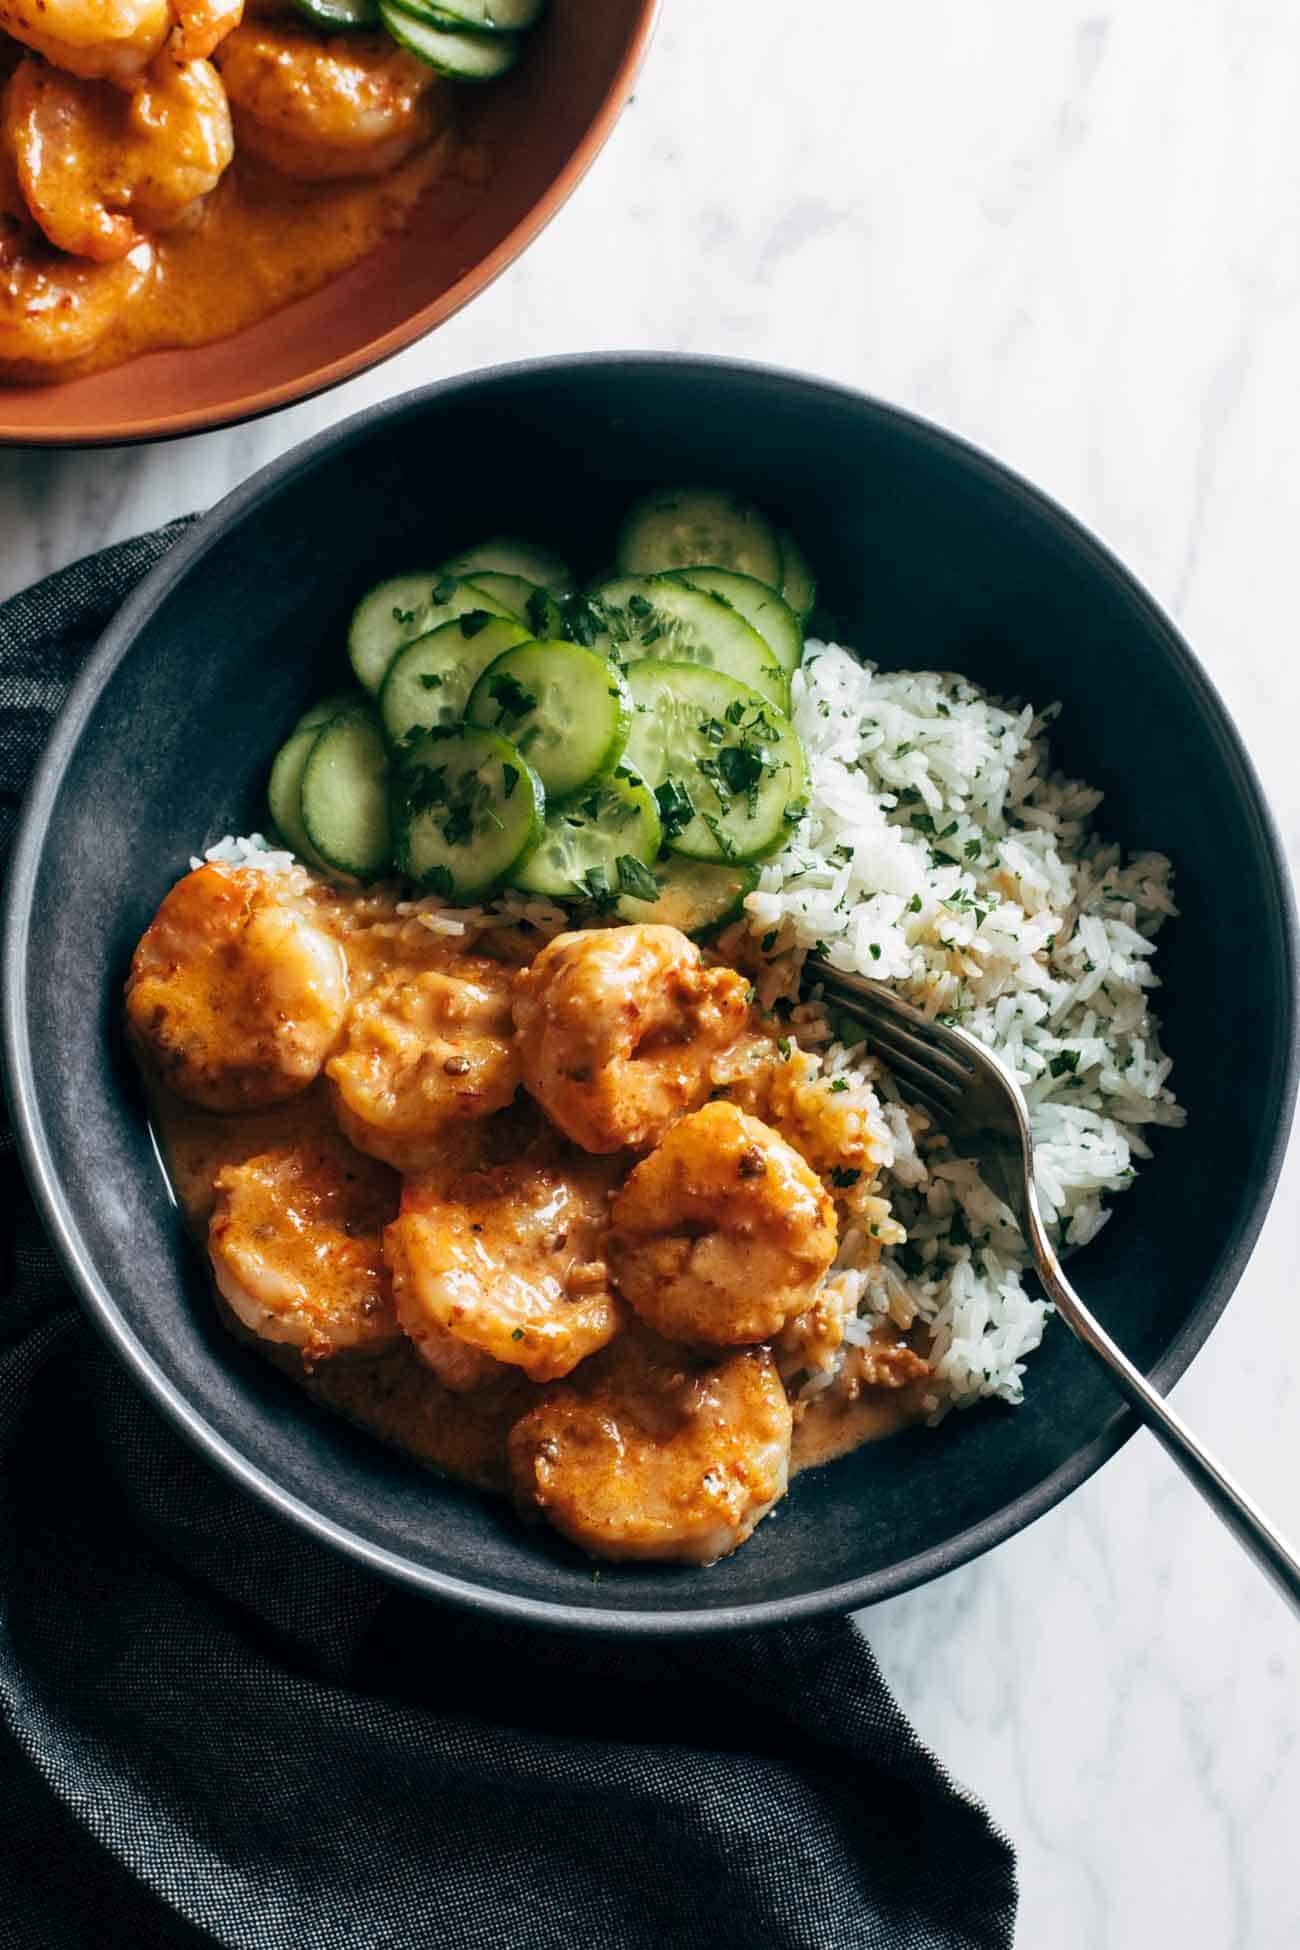 A bowl of shrimp and greens with some rice.